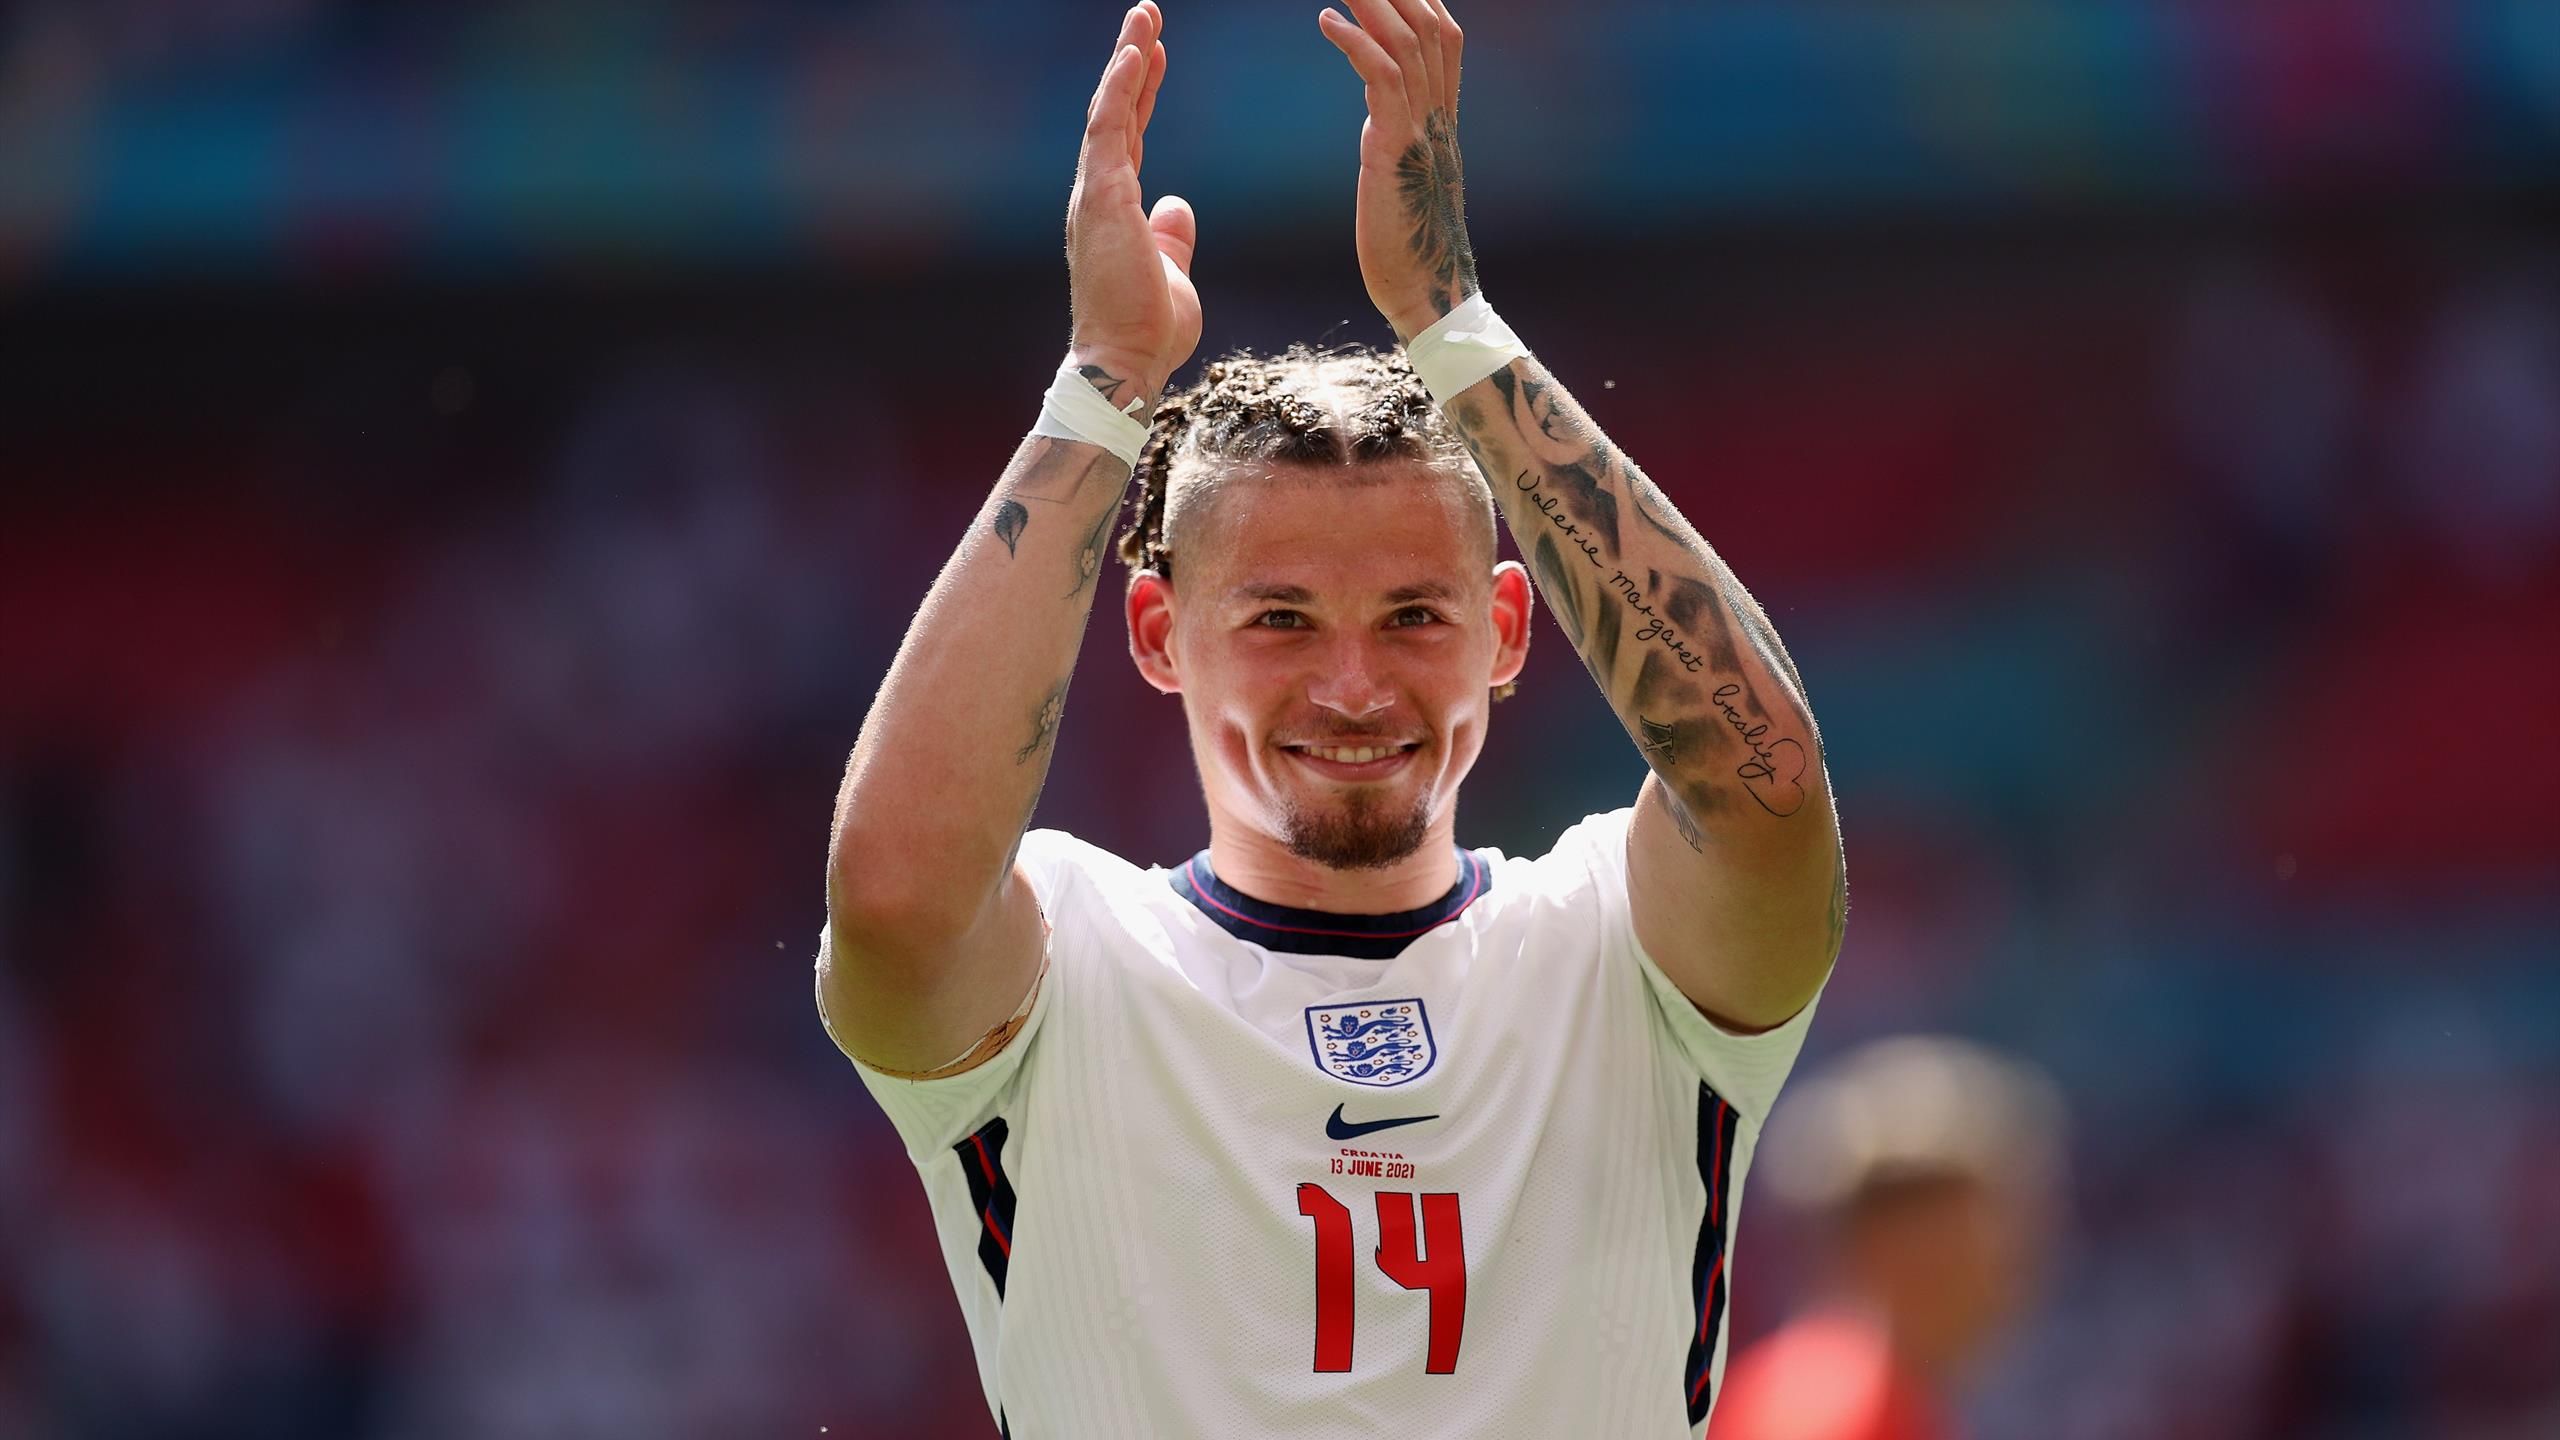 England ratings and analysis: Kalvin Phillips makes midfield his own, Raheem Sterling rewards loyal Southgate